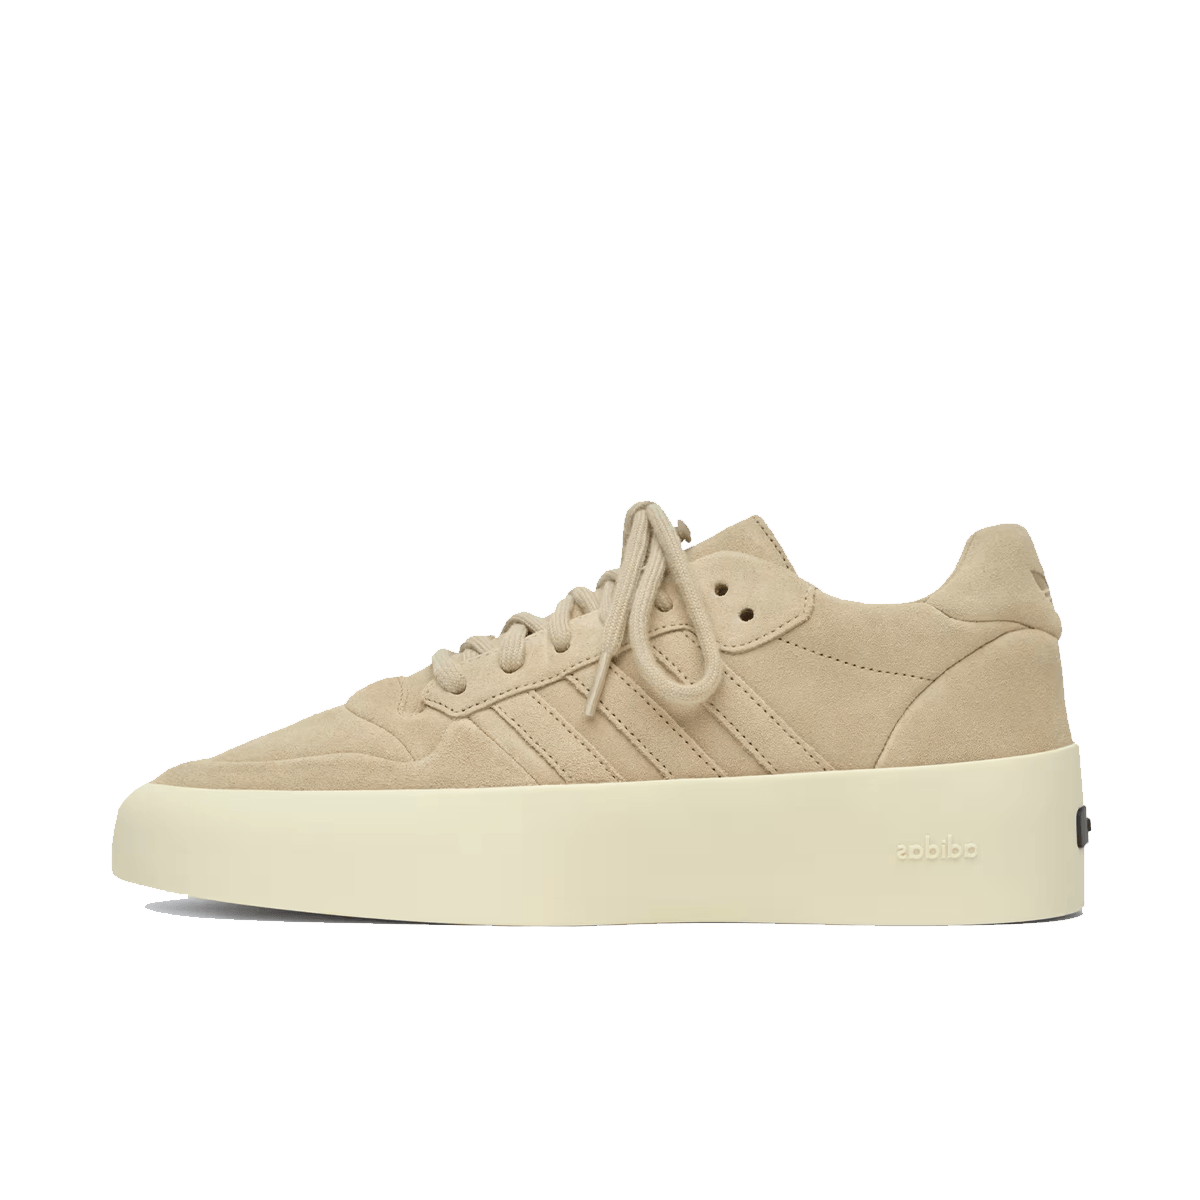 Fear of God Athletics x adidas Rivalry 86 Low 'Clay' IE6213